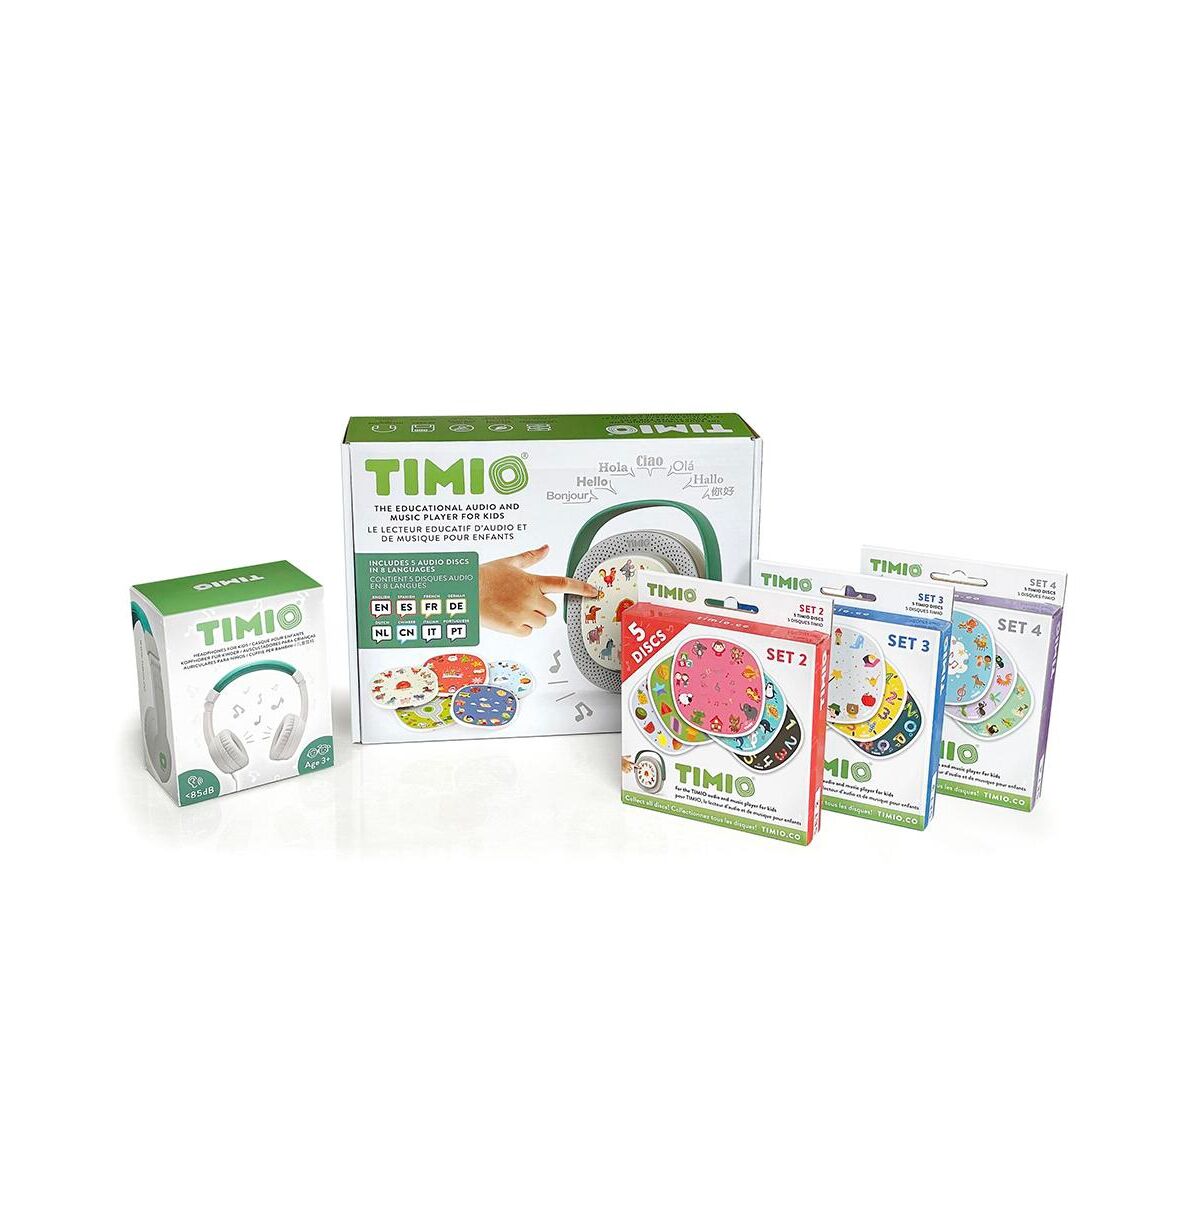 Timio Screenless Educational Audio and Music Player + 3 Disc Packs 20 discs total + Headset - White